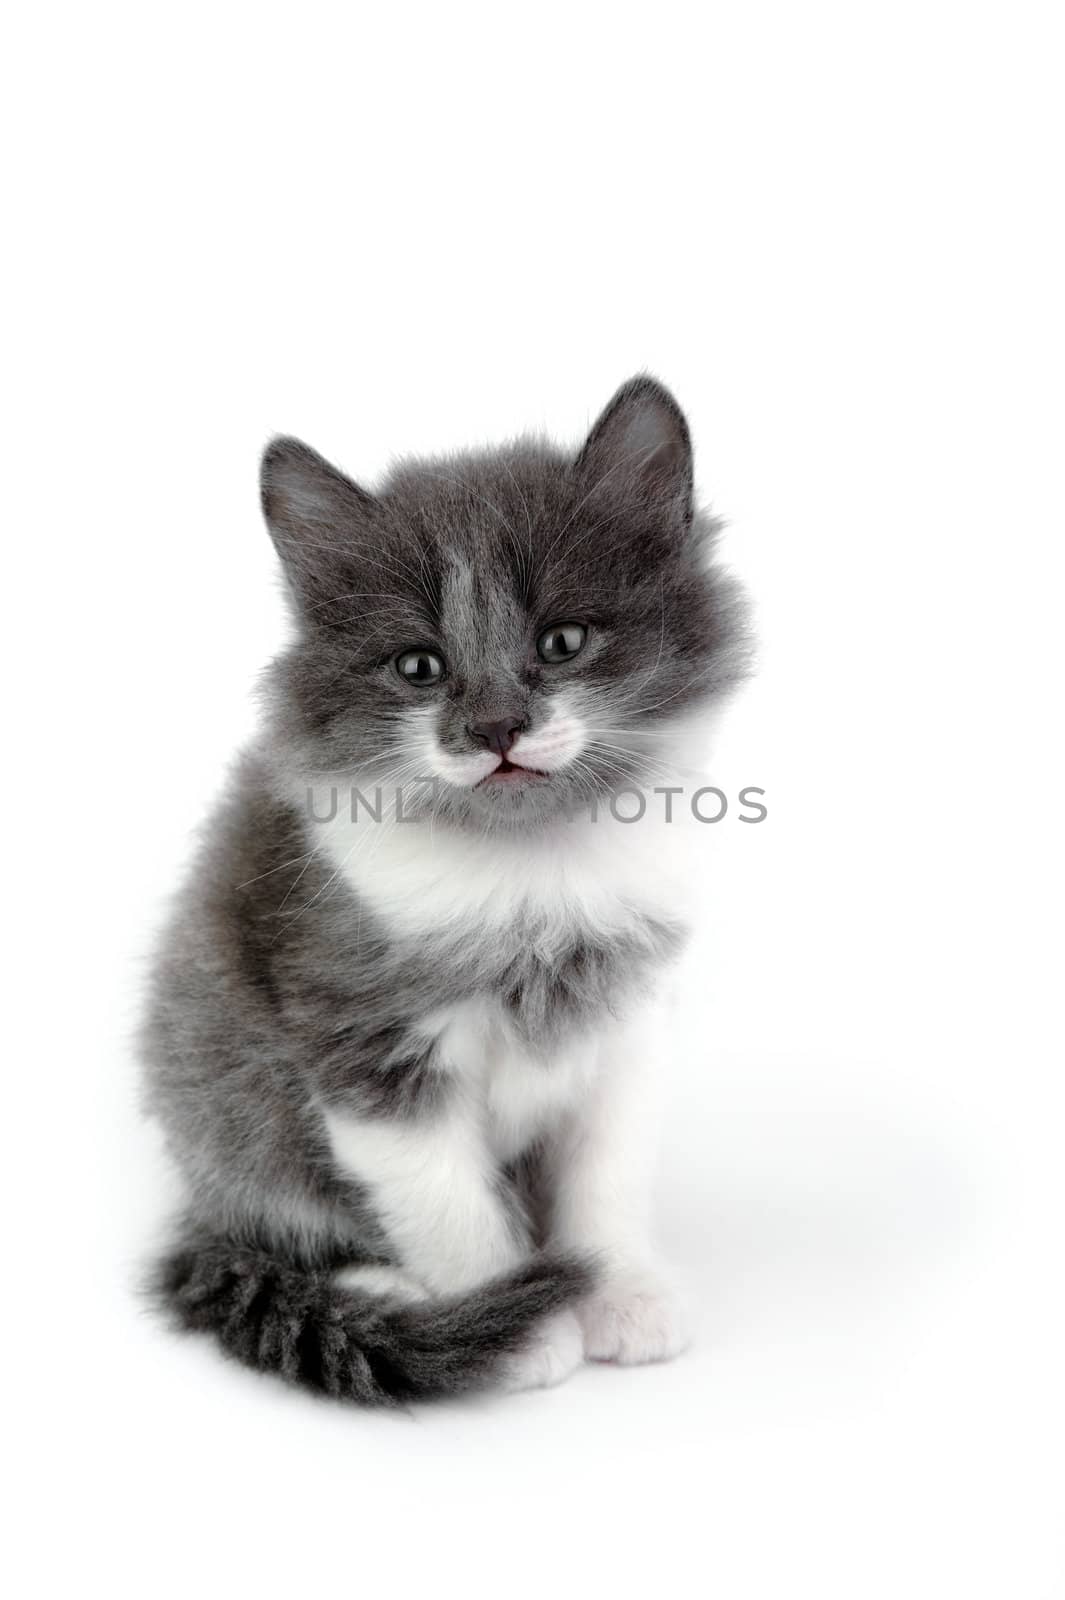 An image of a little fluffy kitten on white background